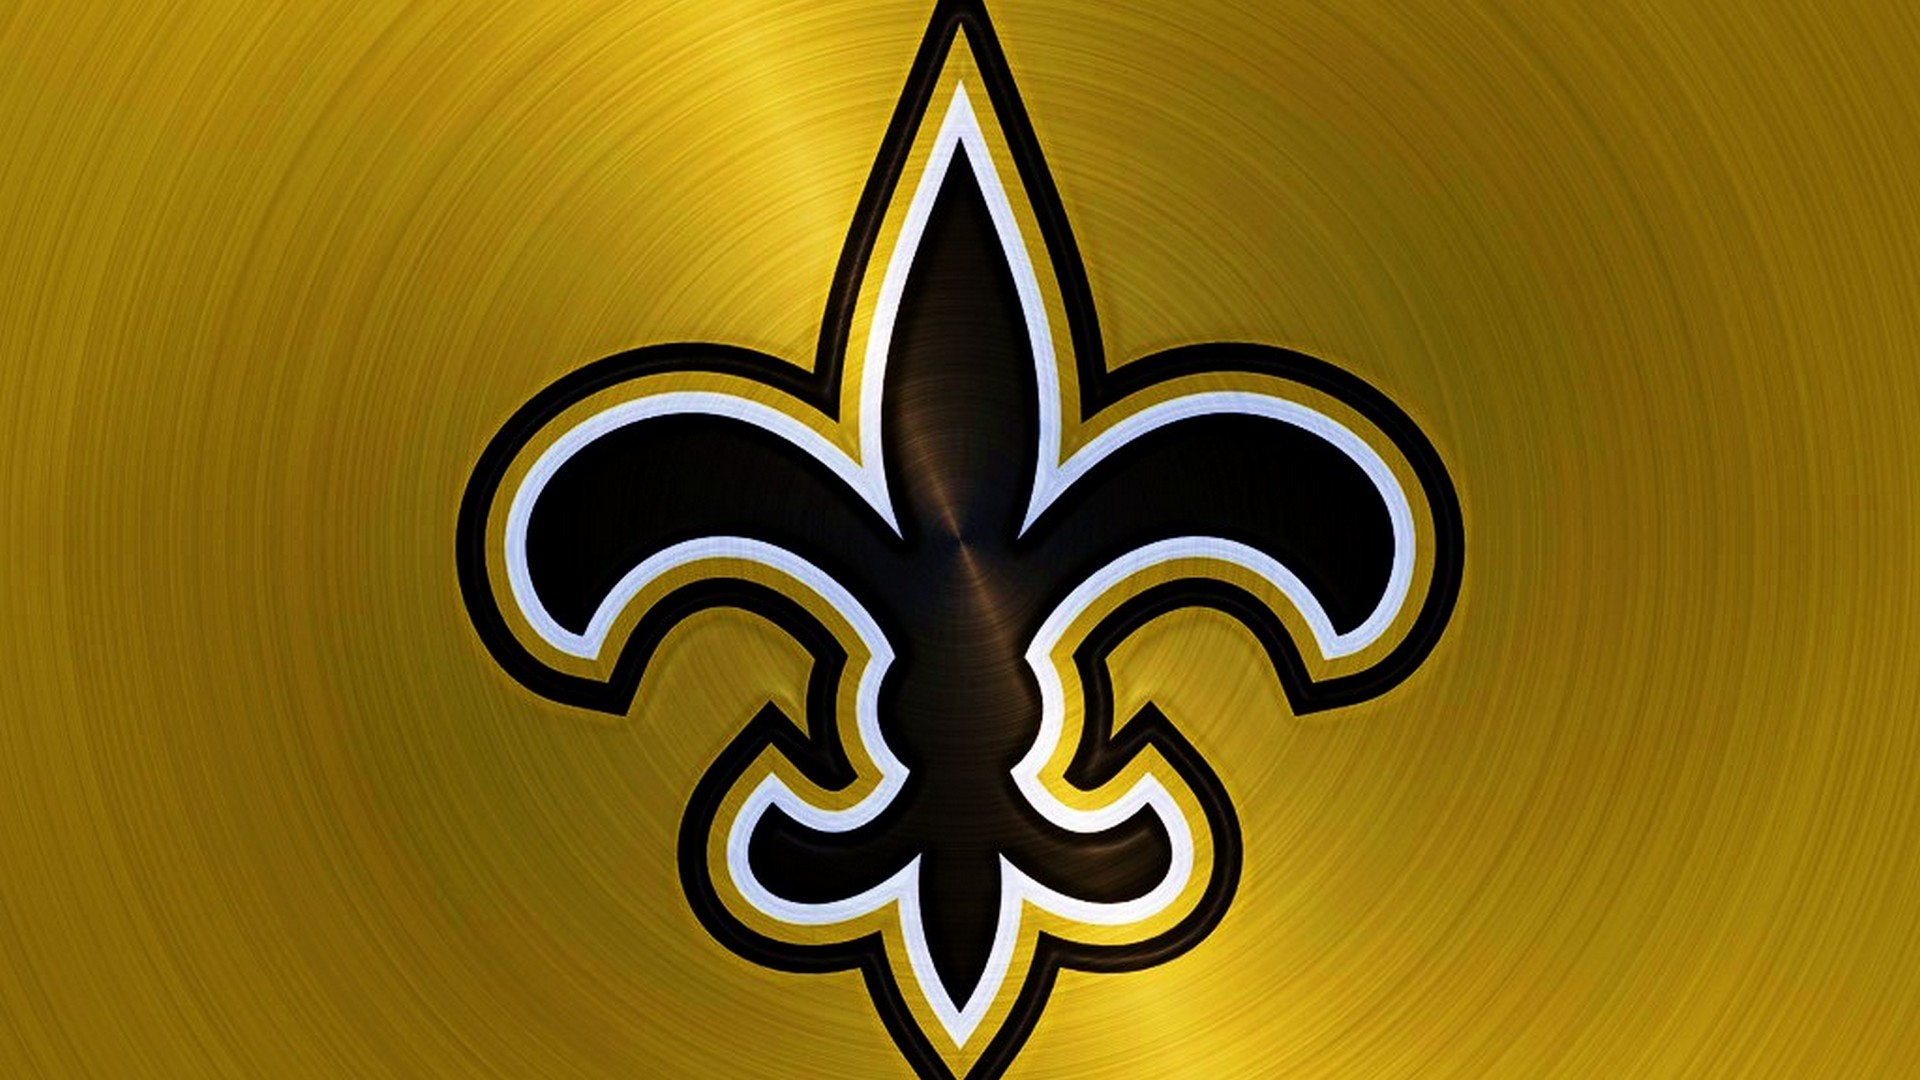 Wallpapers HD New Orleans Saints NFL With Resolution 1920X1080 pixel. You can make this wallpaper for your Mac or Windows Desktop Background, iPhone, Android or Tablet and another Smartphone device for free